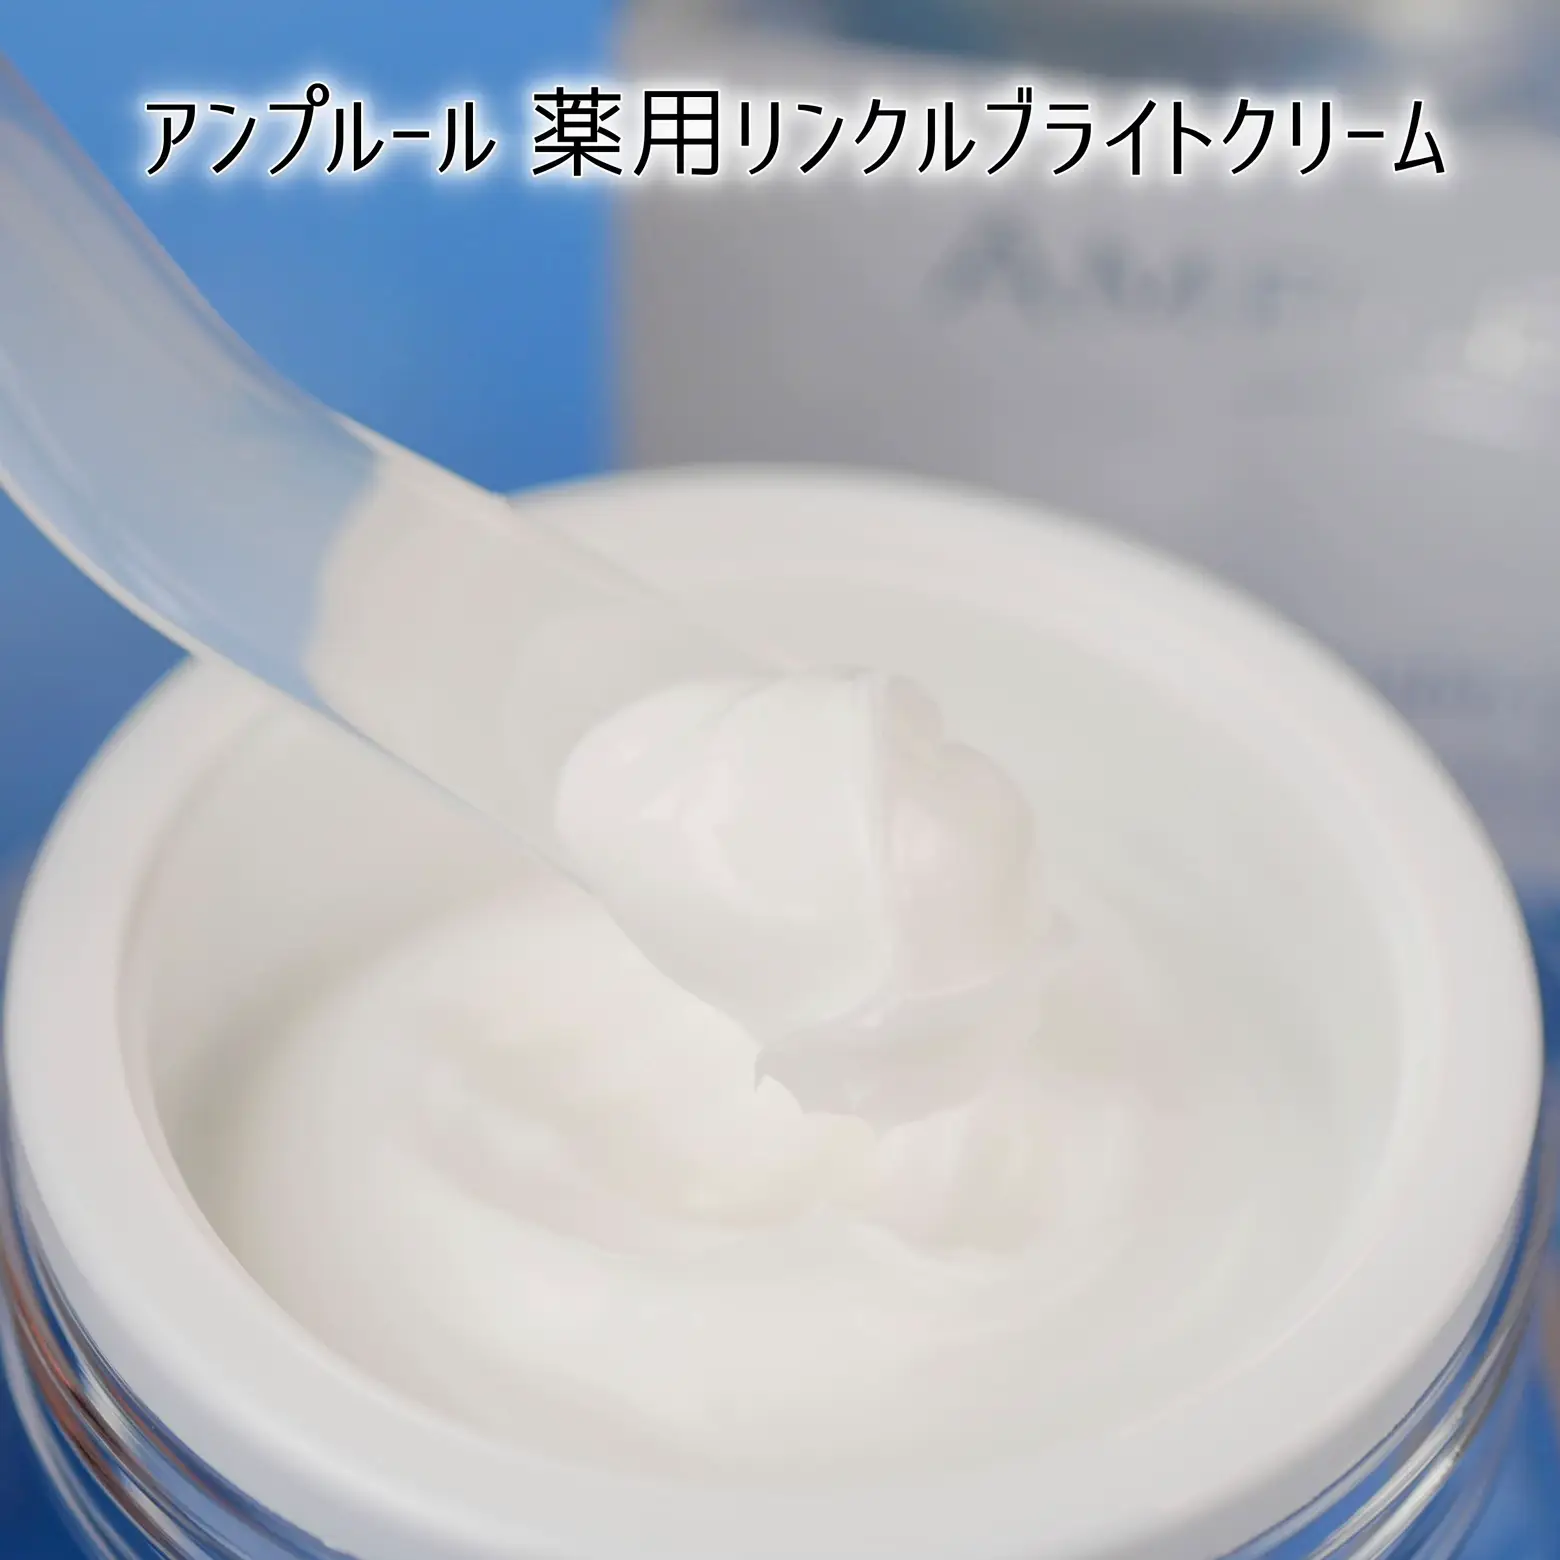 Ampoule New Product Medicinal Wrinkle Bright Cream | Gallery posted by